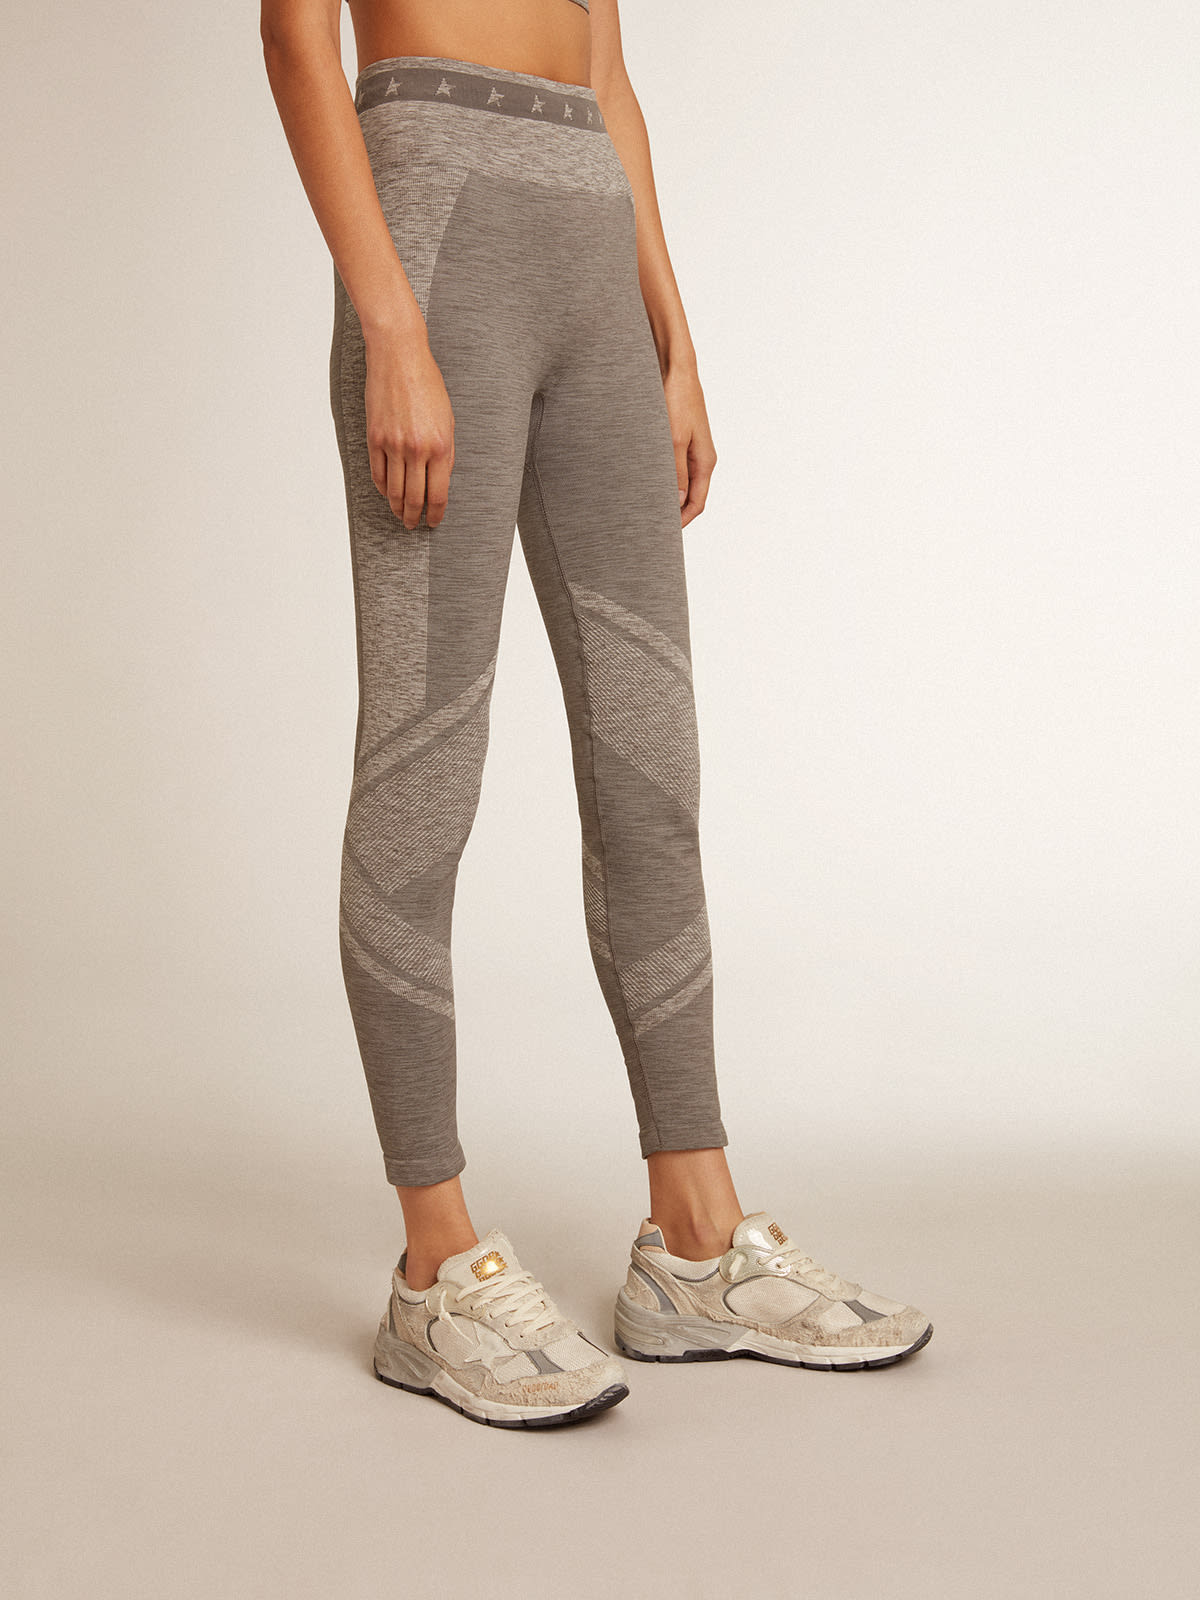 Golden Goose - Women’s gray melange leggings with mixed stitching in 